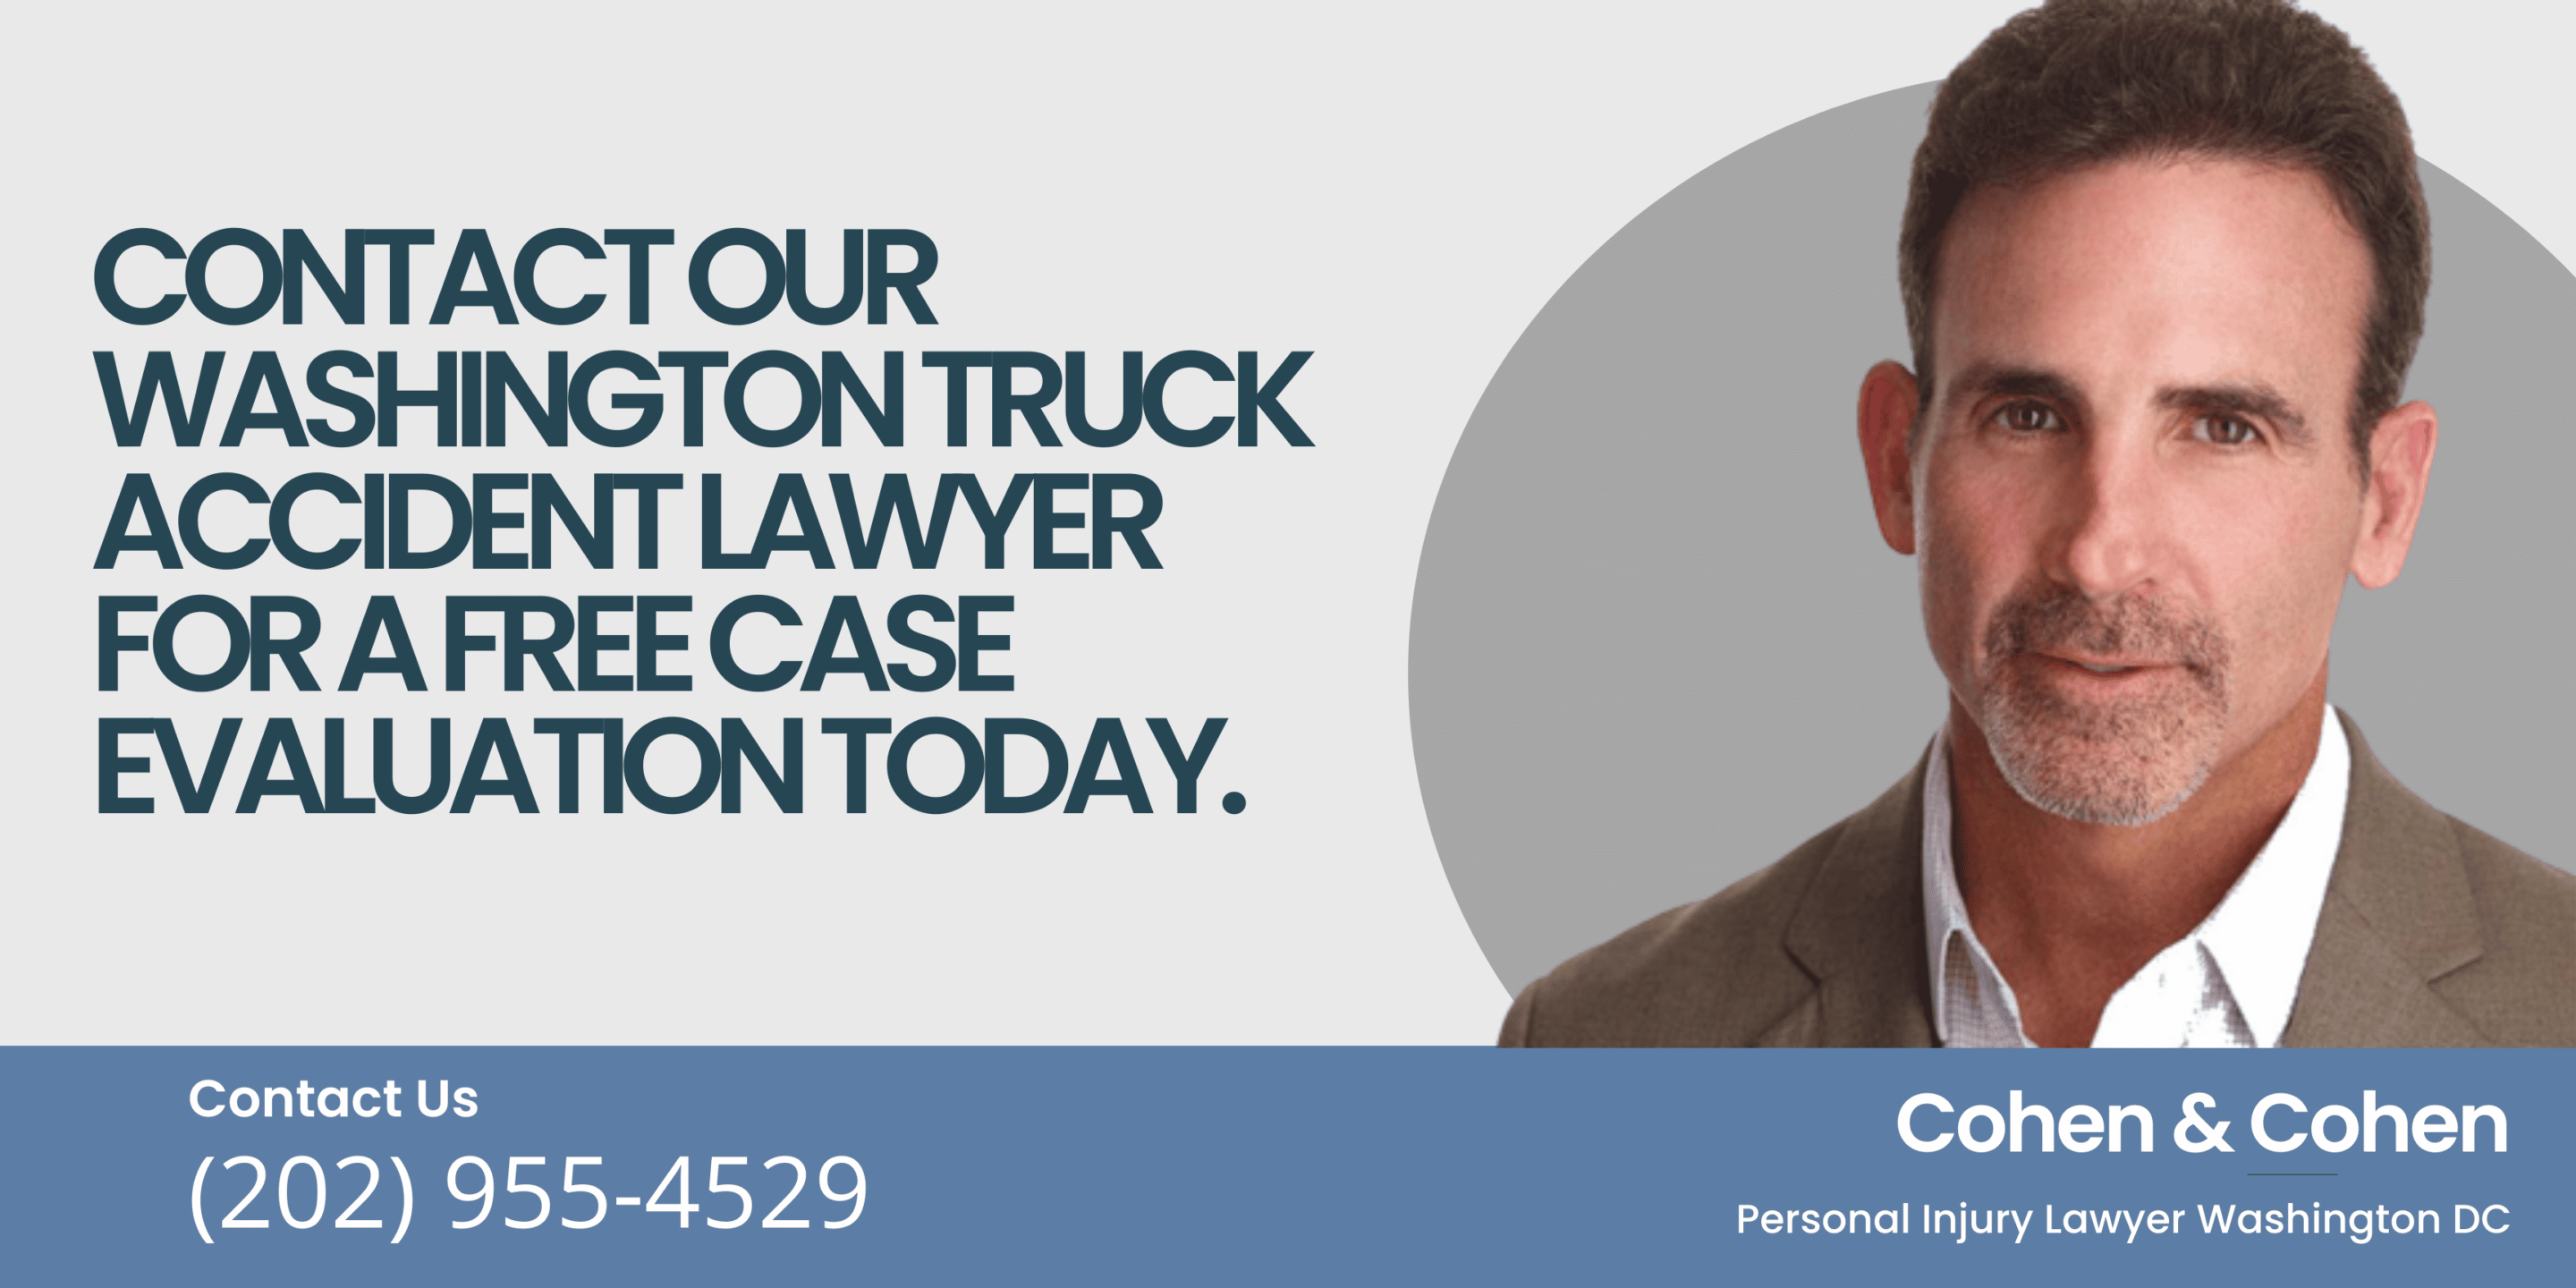 contact our Washington Truck Accident Lawyer